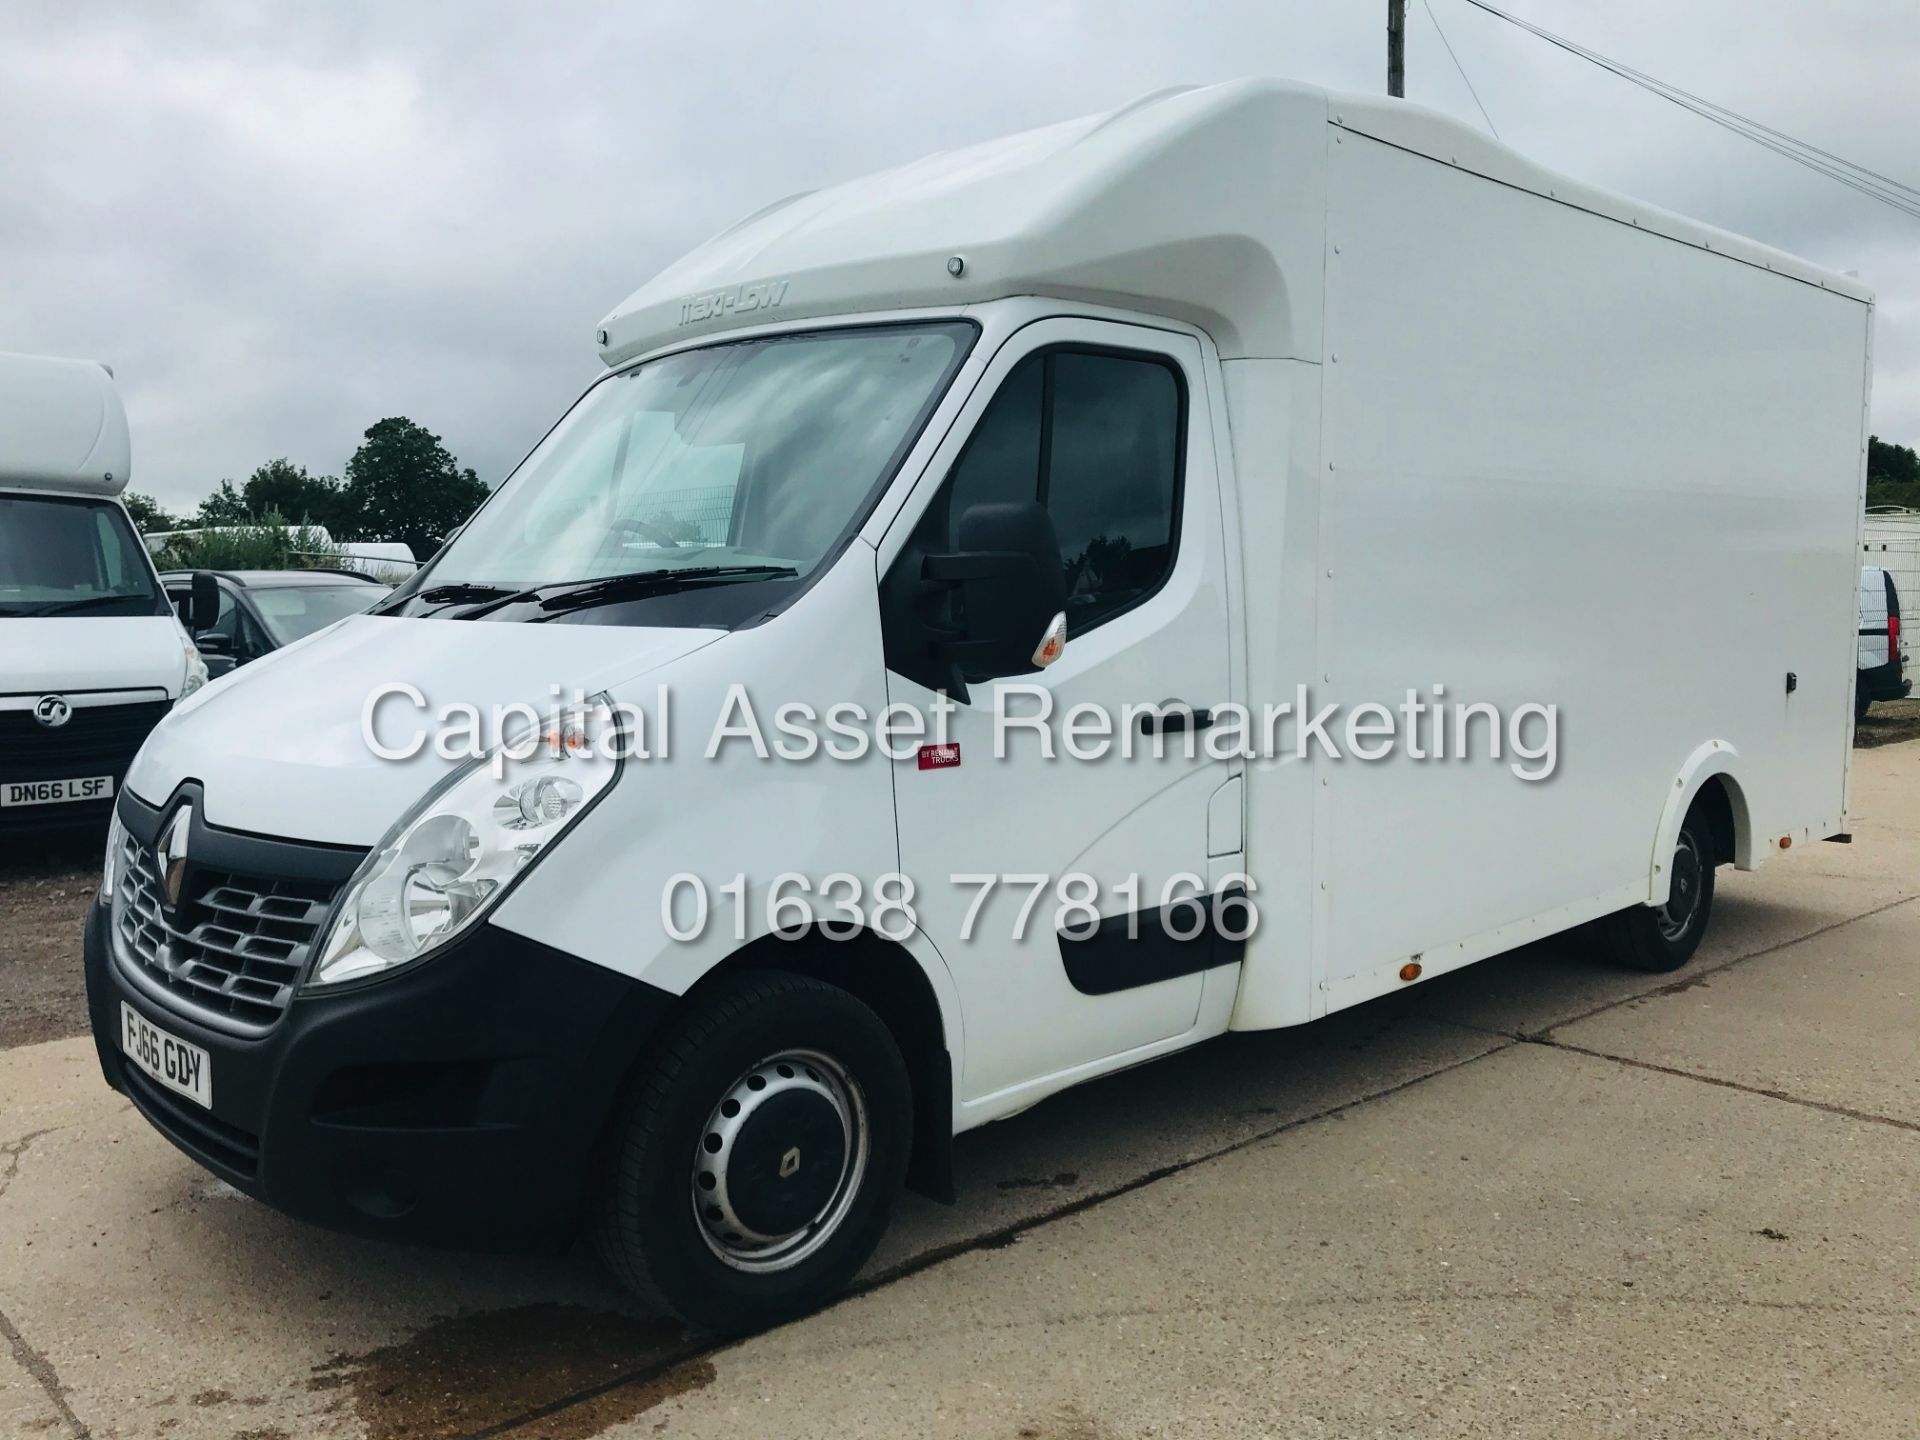 On Sale RENAULT MASTER 2.3DTI "LWB" MAXI-LOW LUTON (2017 REG) EURO 6 -1 OWNER BARN DOORS - AIR CON - Image 6 of 22